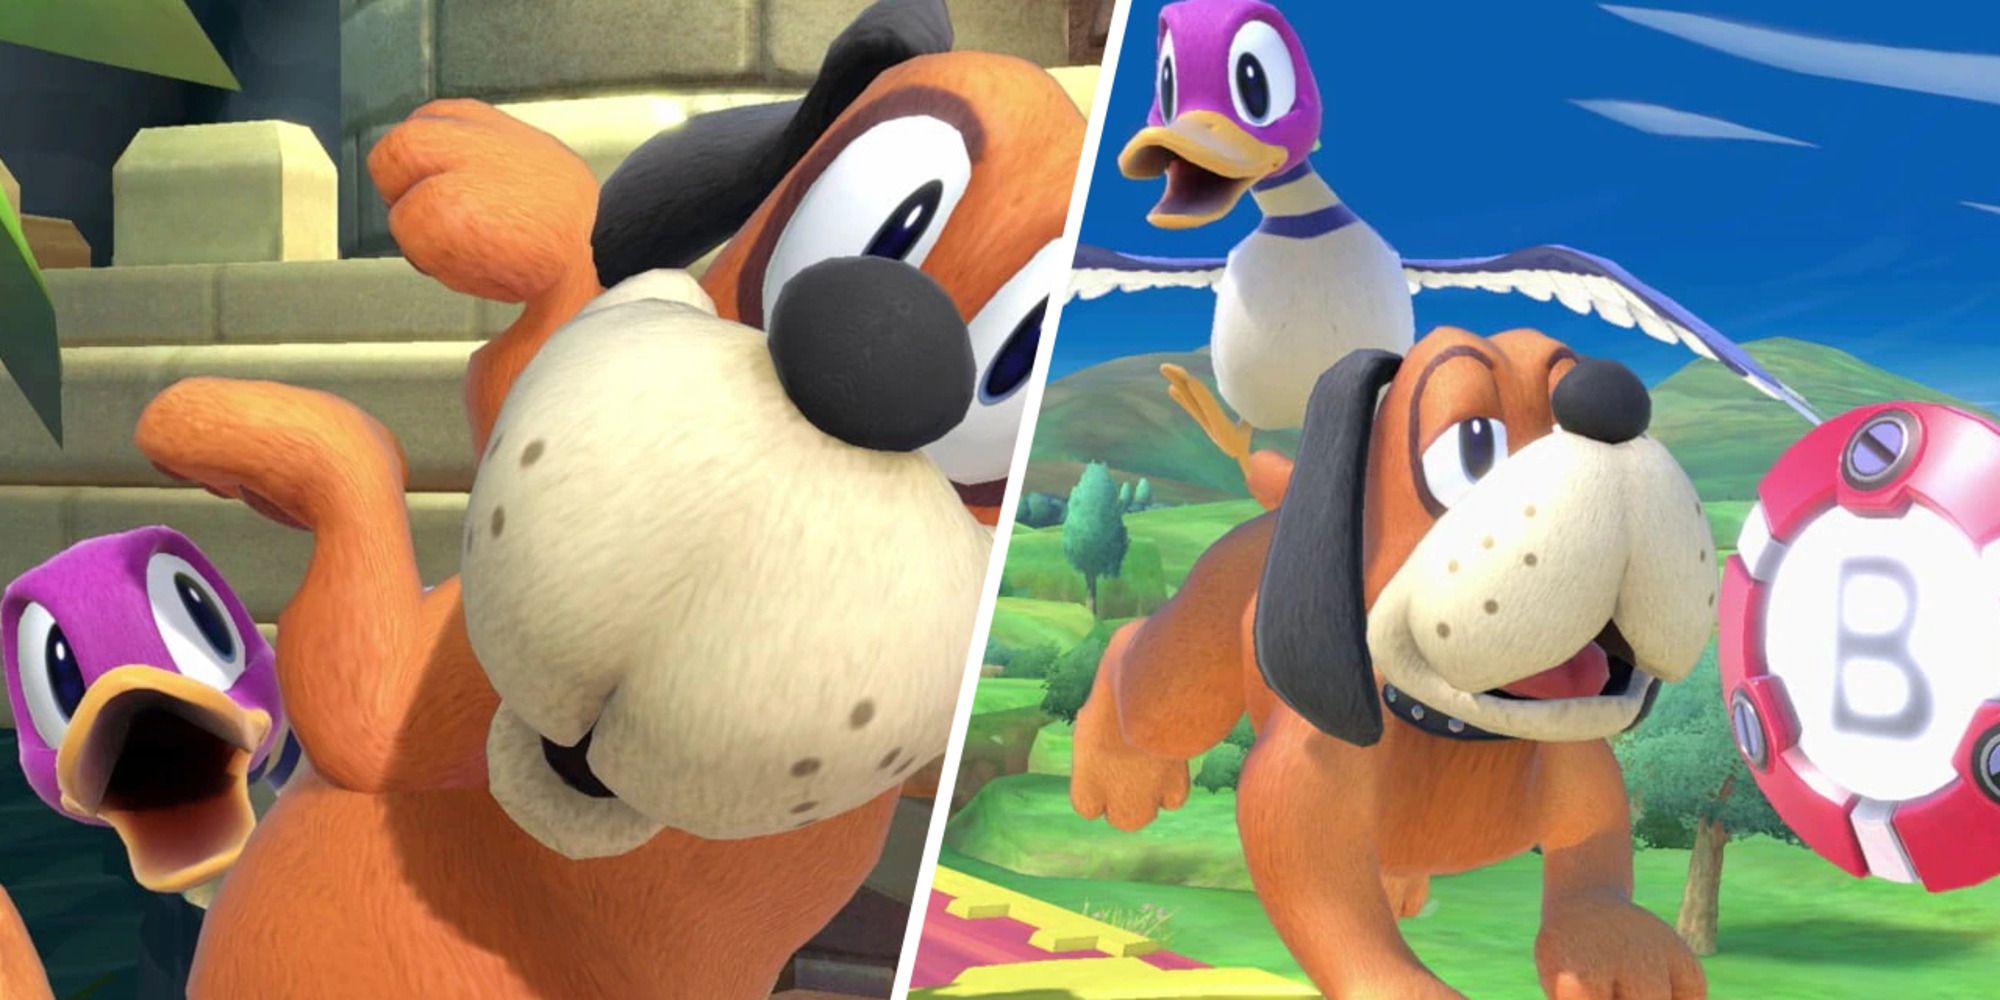 Duck Hunt chasing after a bomb and doing their dodging animation in Super Smash Bros. Ultimate.